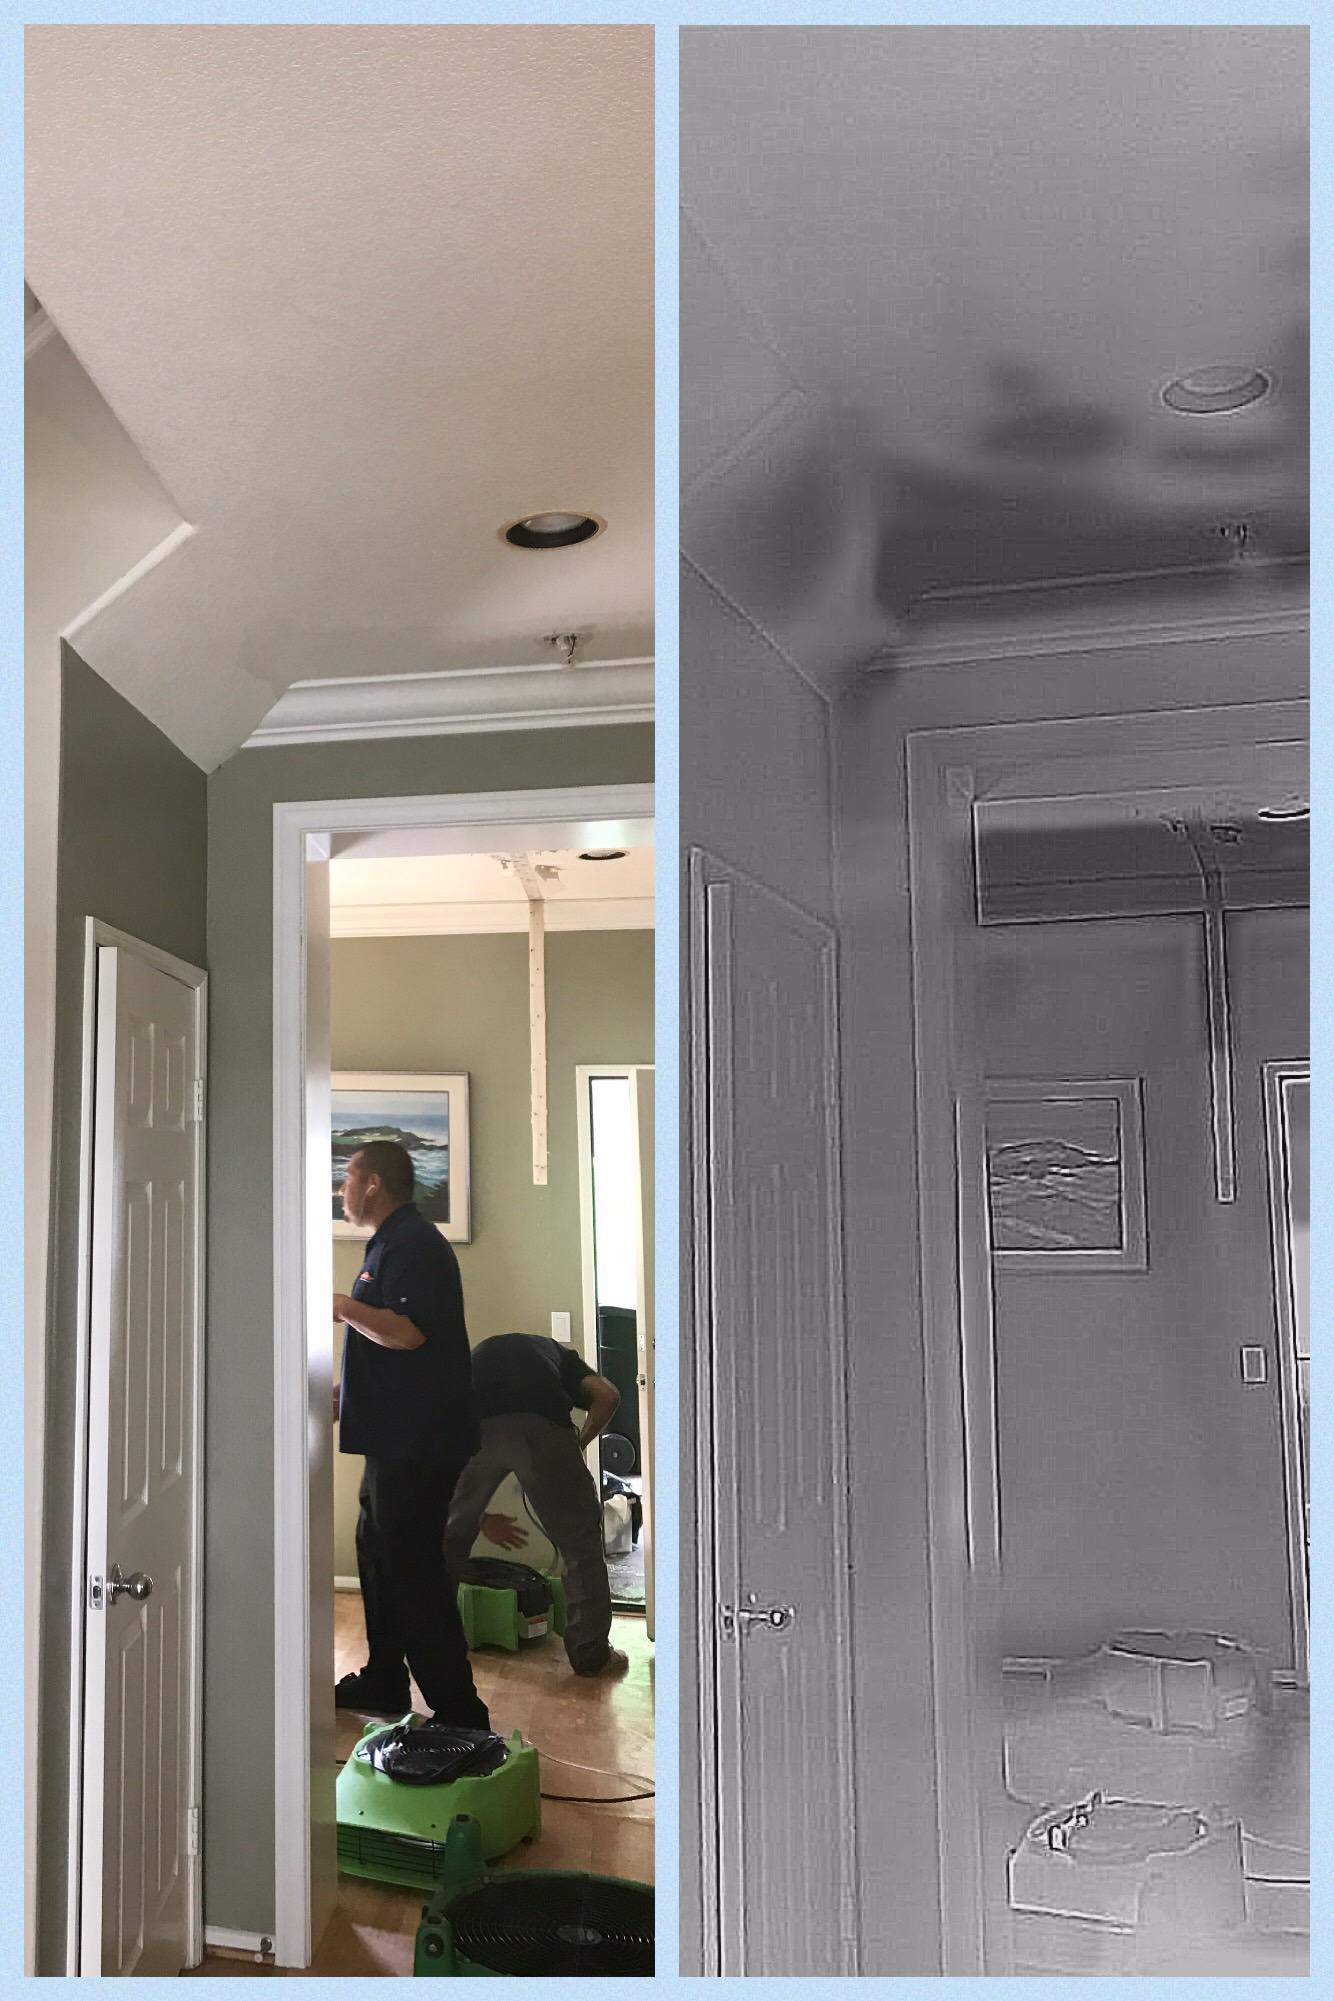 SERVPRO of Laguna Beach/Dana Point will work hard to properly mitigate the water damage in your home or business.